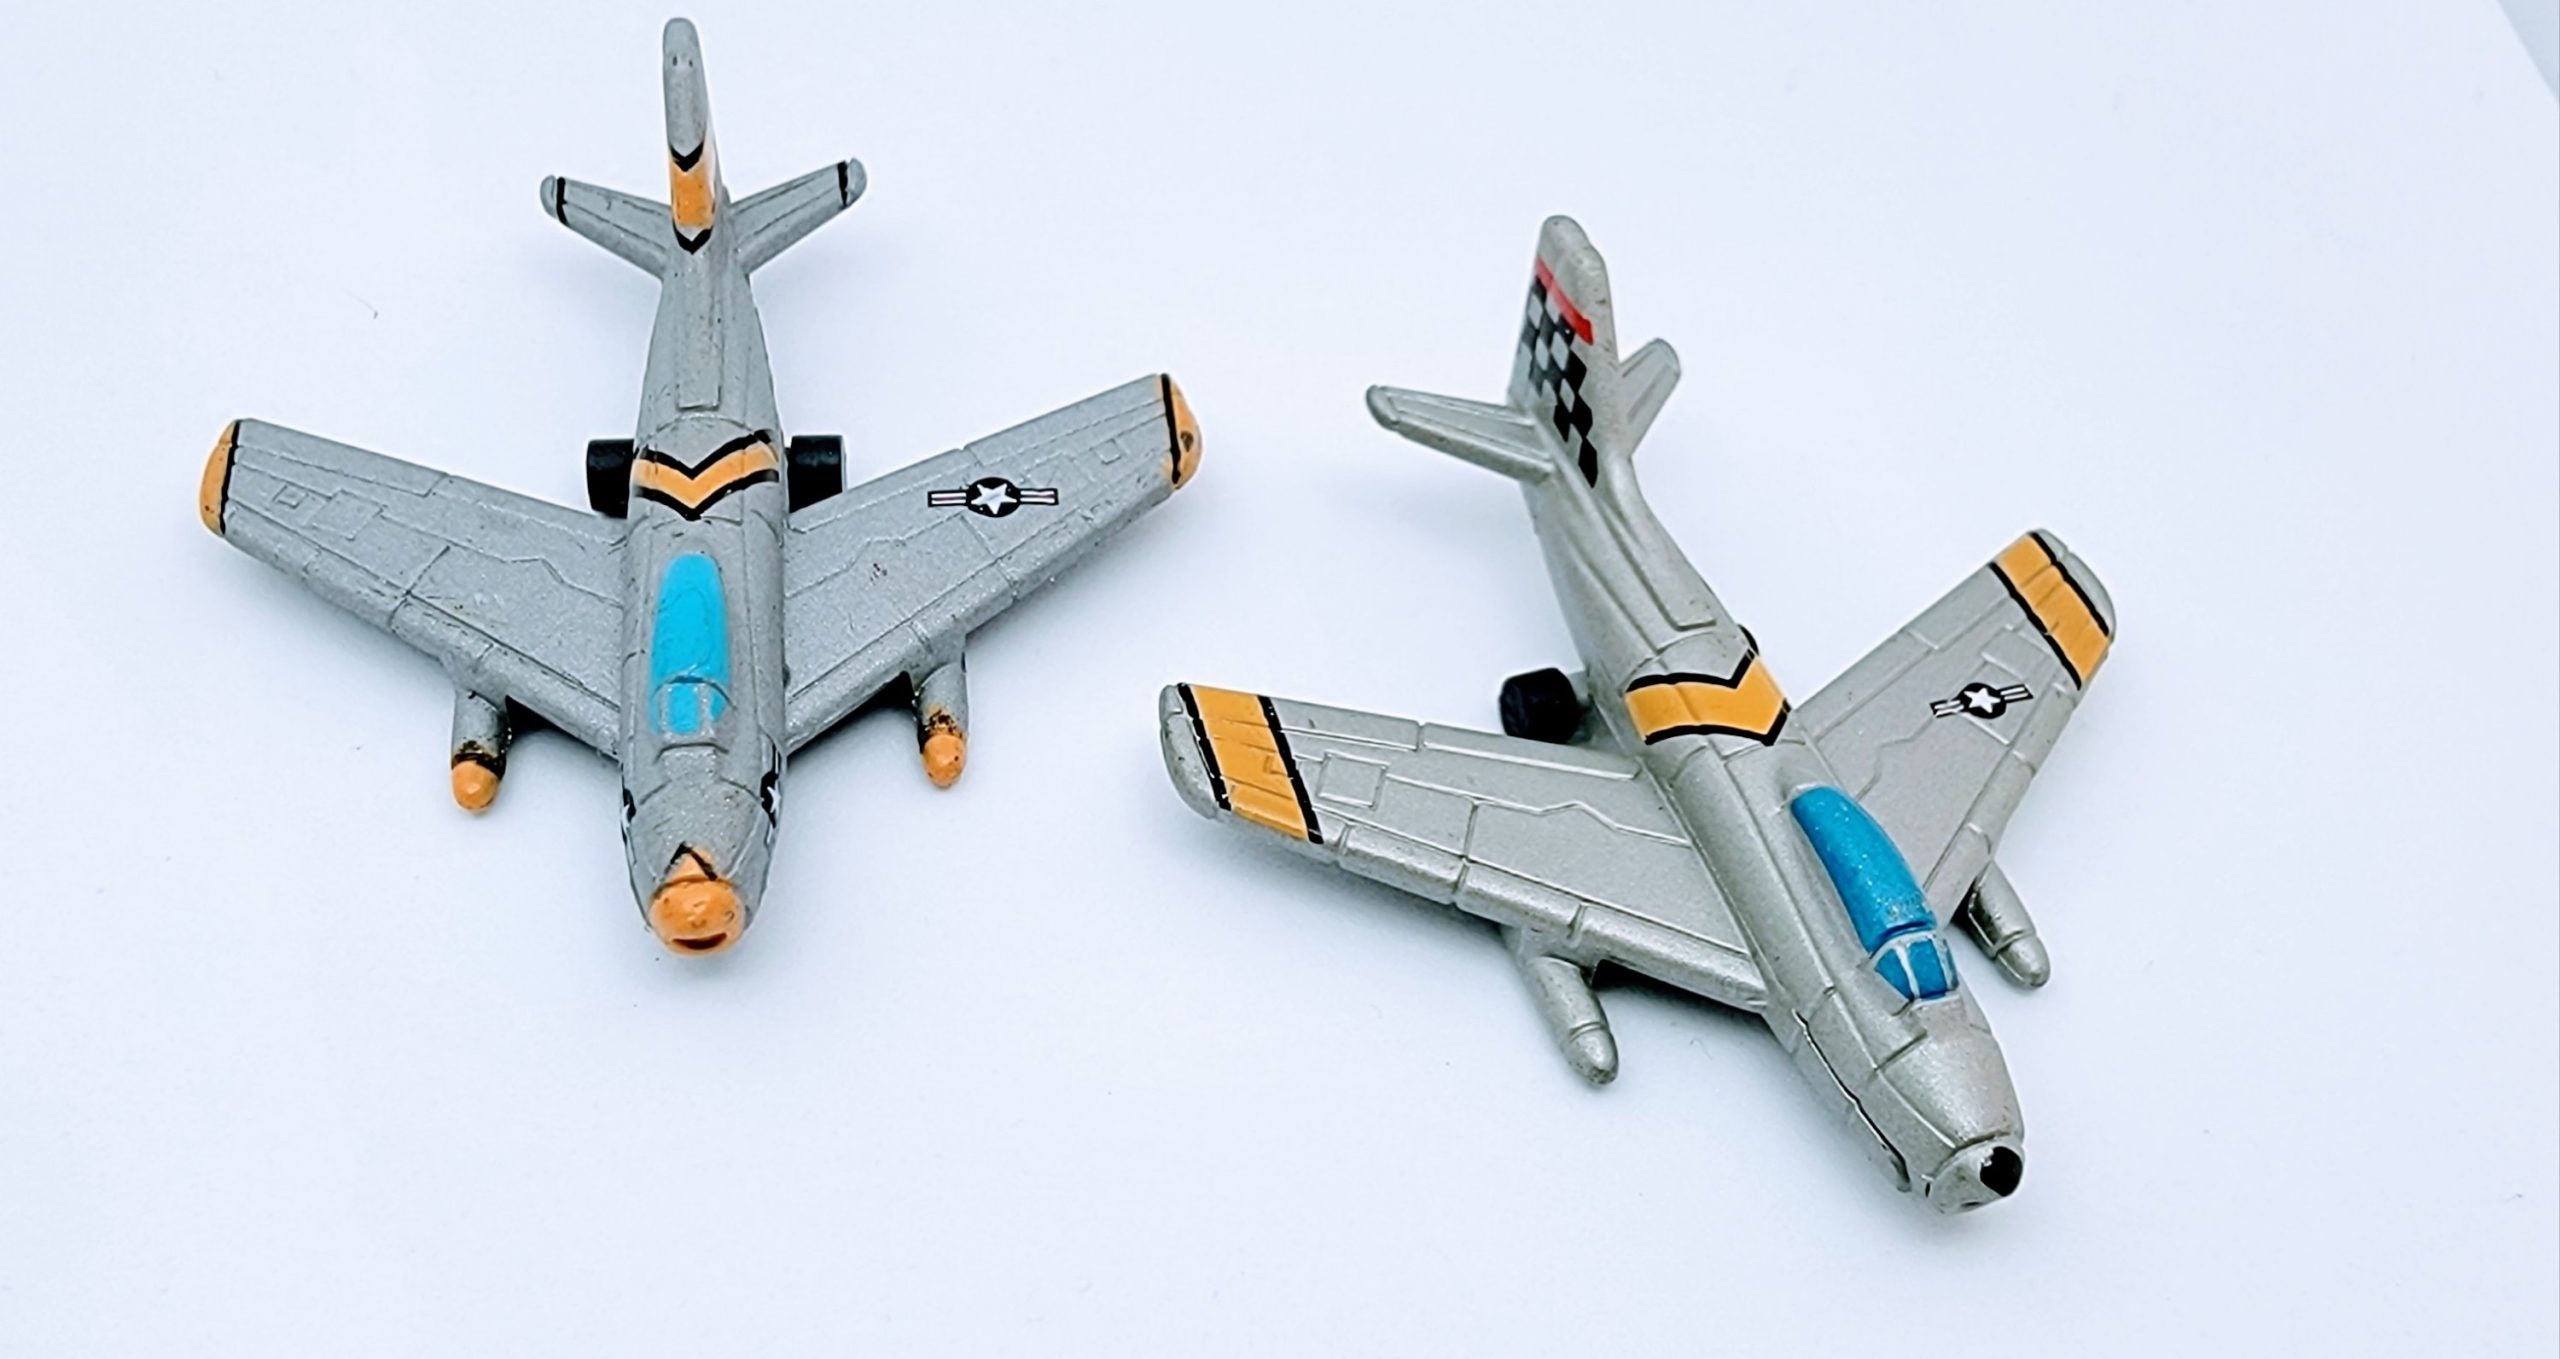 Micro Machines Military USAF F-86 Sabre Miniature Jet Fighter Lot of 2 Miniature Toy MMB3 simple Xclusive Collectibles   